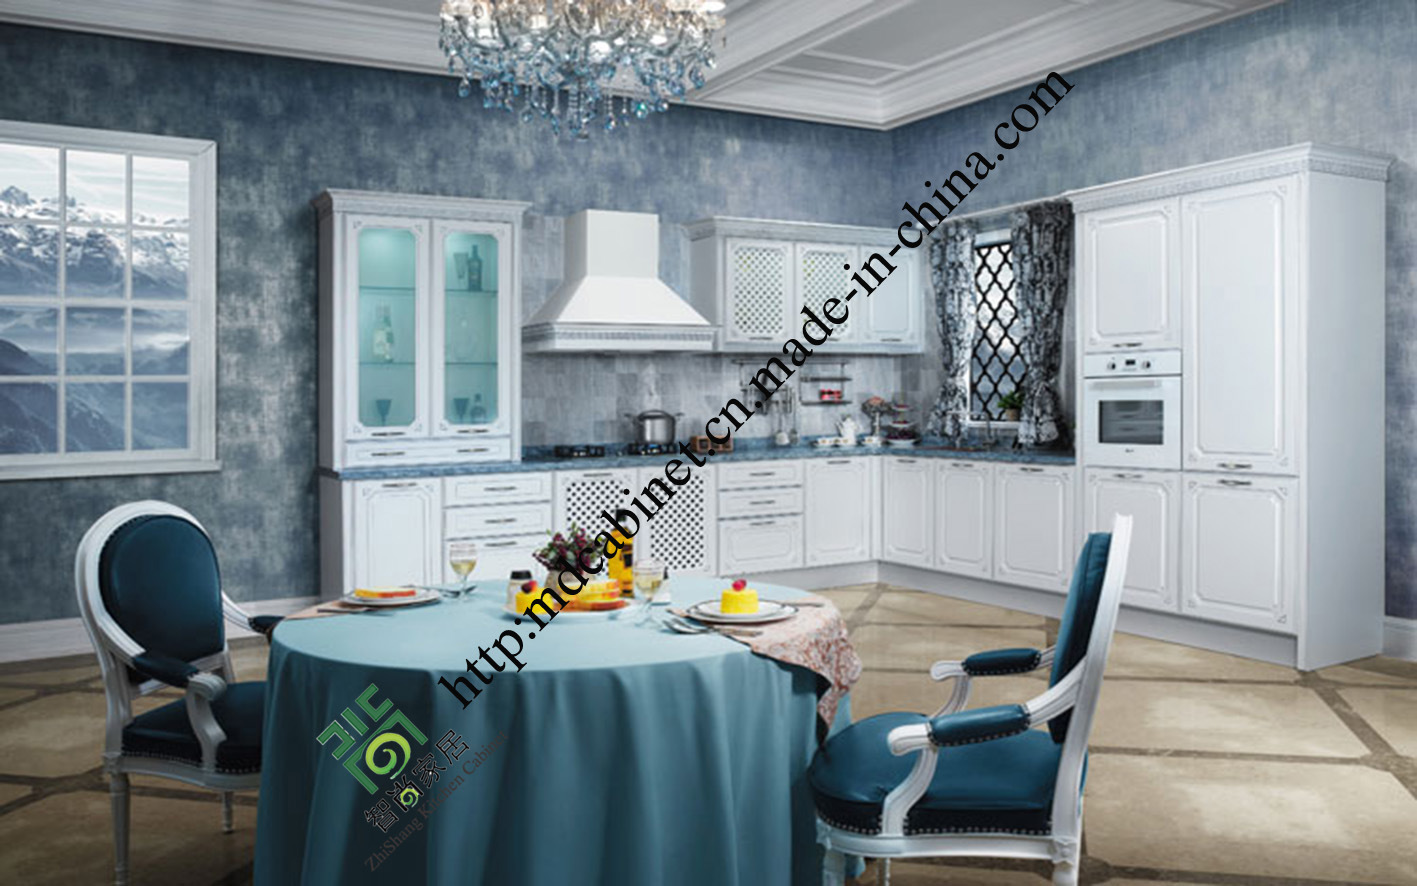 Classical PVC Kitchen Cabinets (zs-480)